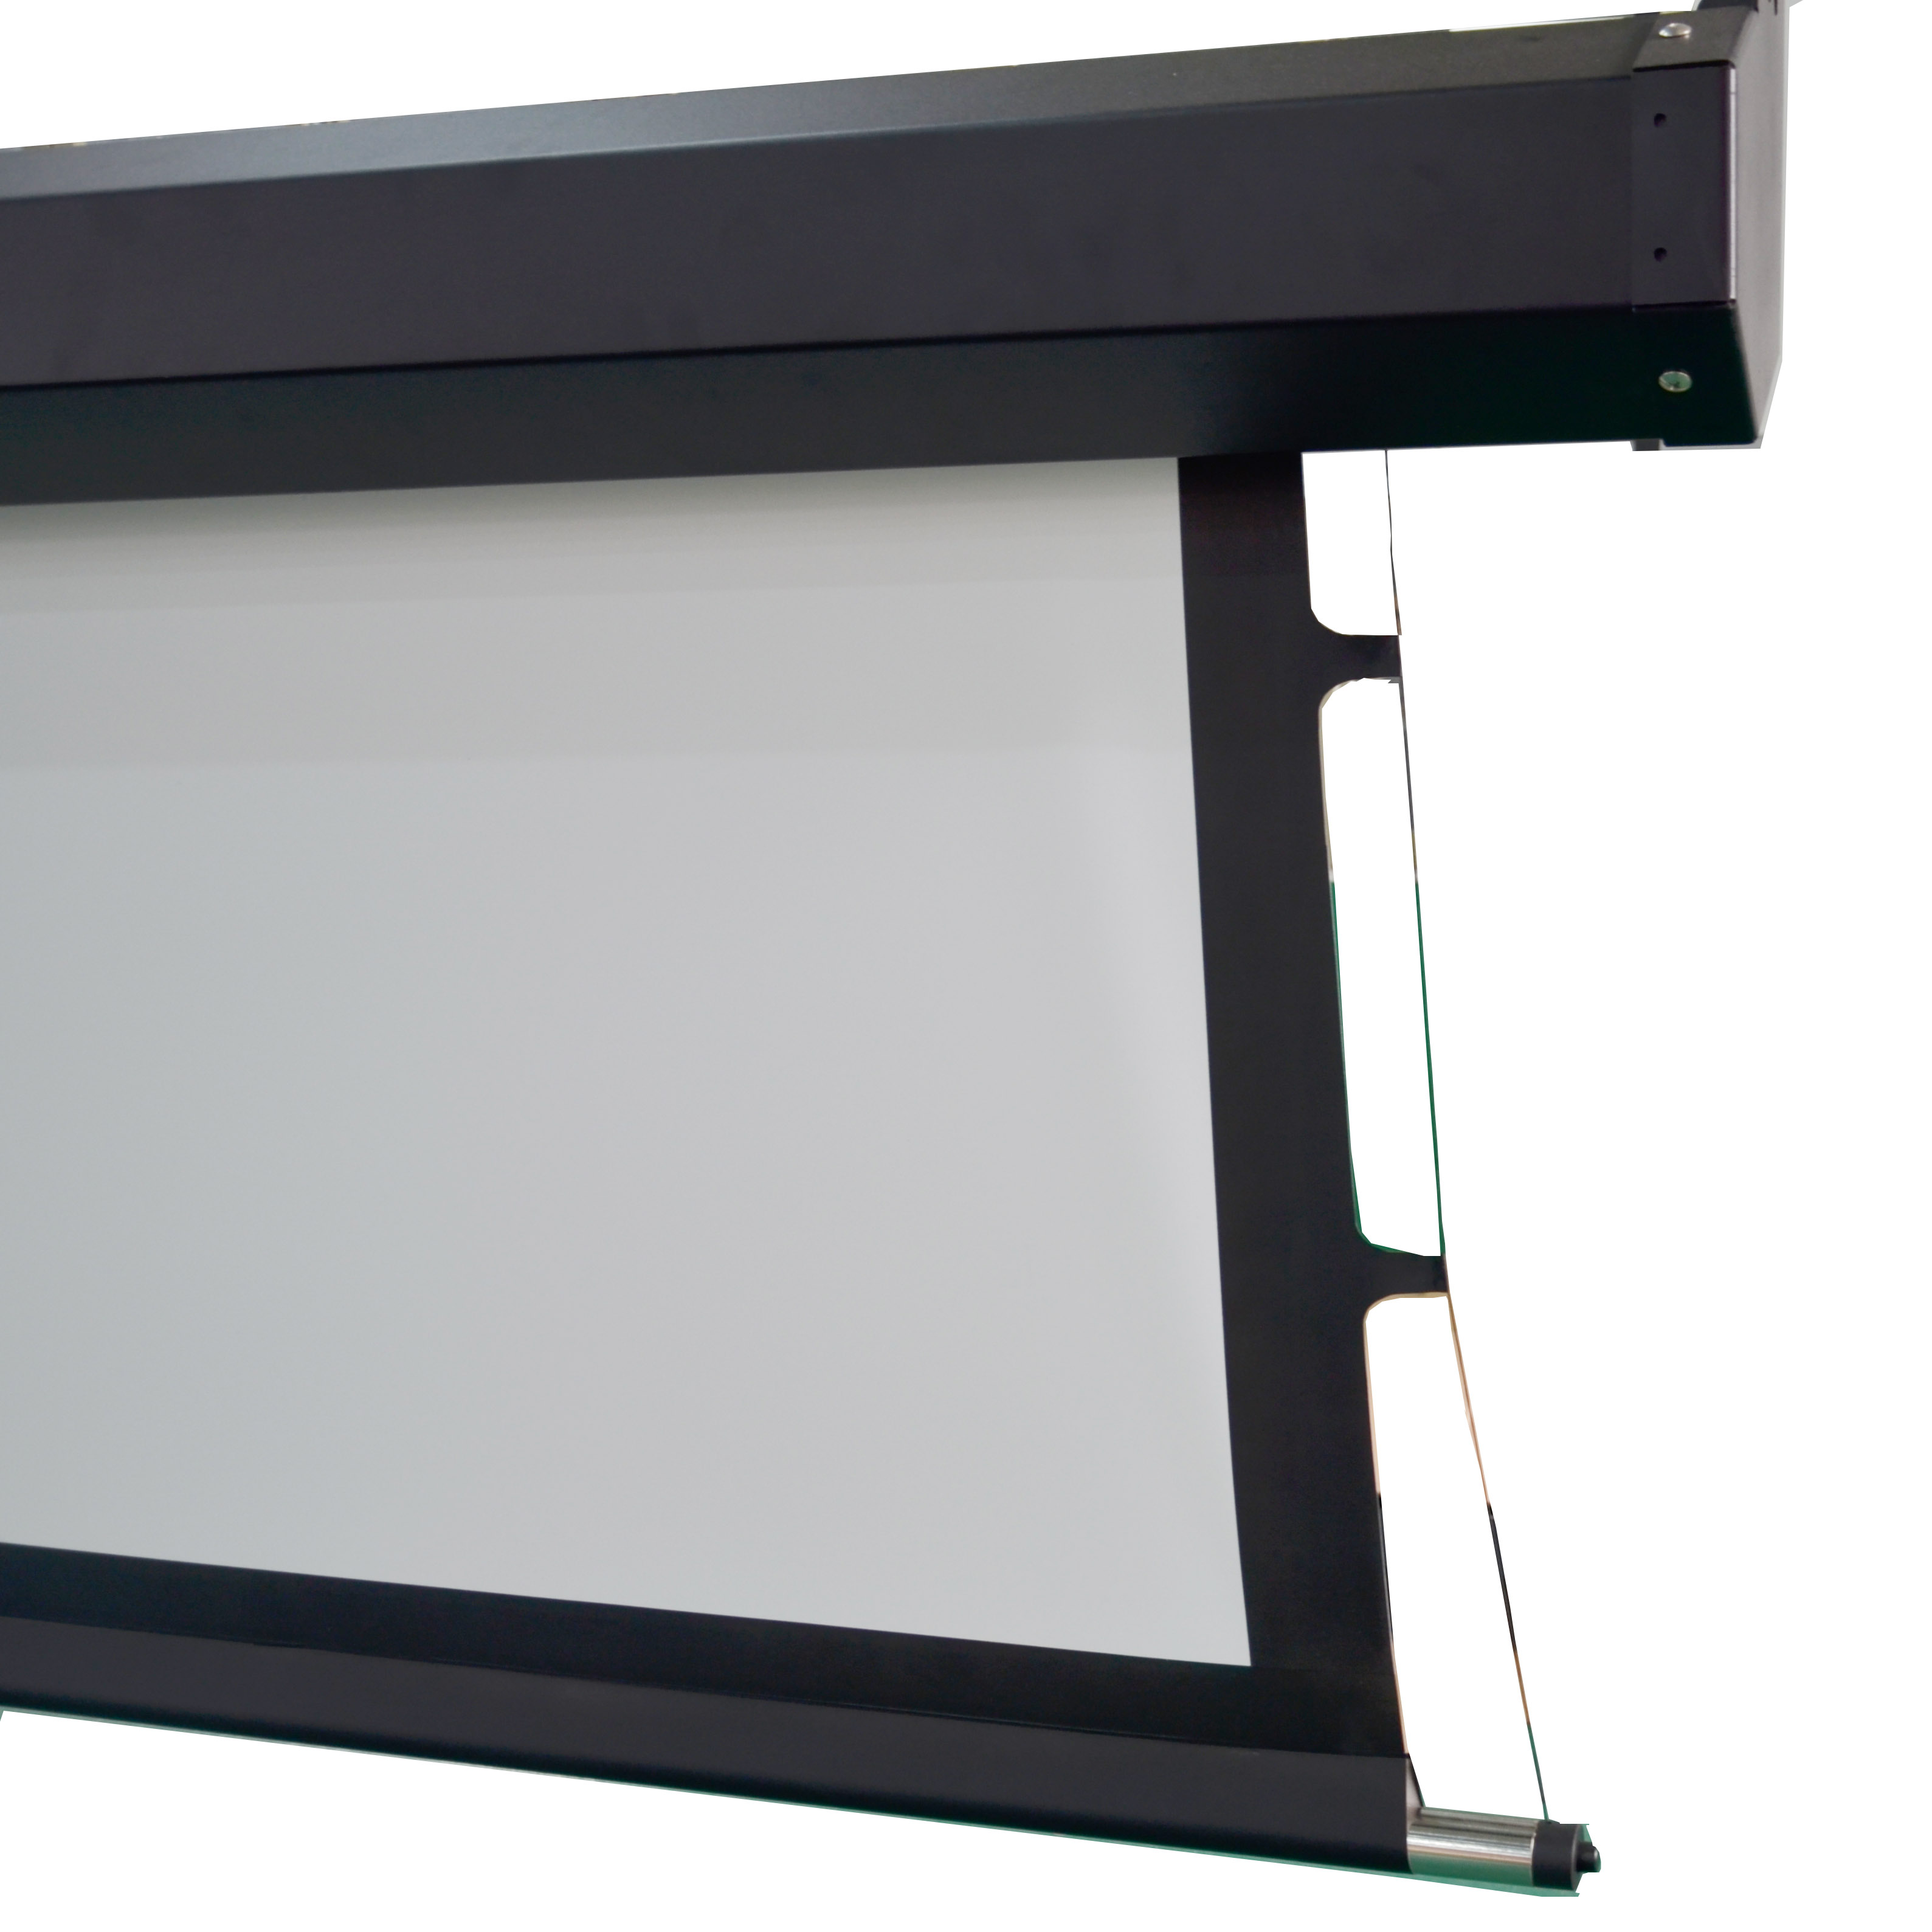 XY Screens large portable projector screen from China for PC-2